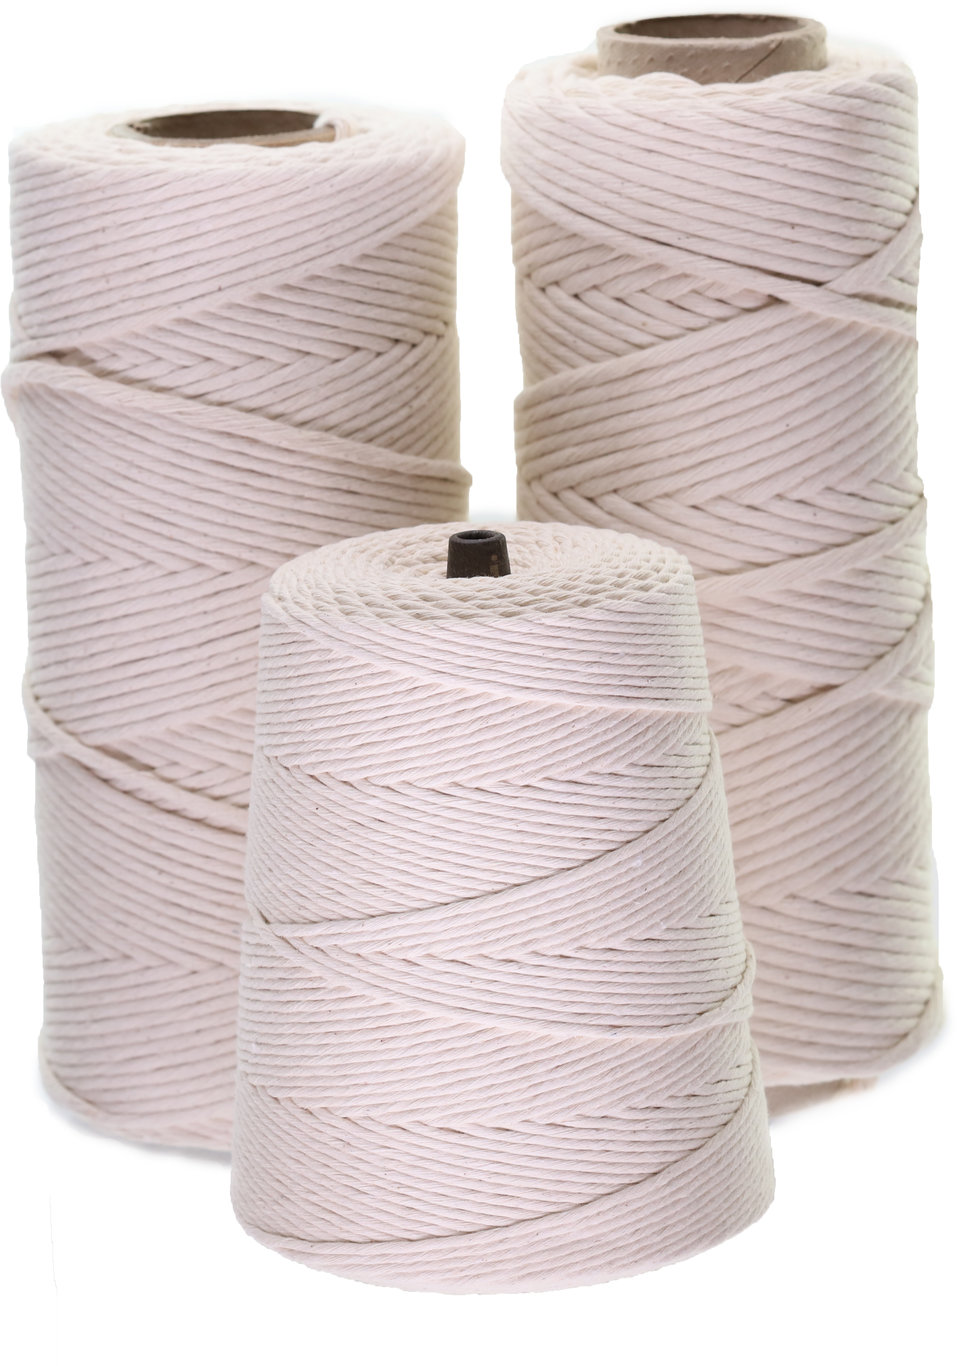 Cotton Single Strand (100% Cotton) ropes - Lowest prices, free